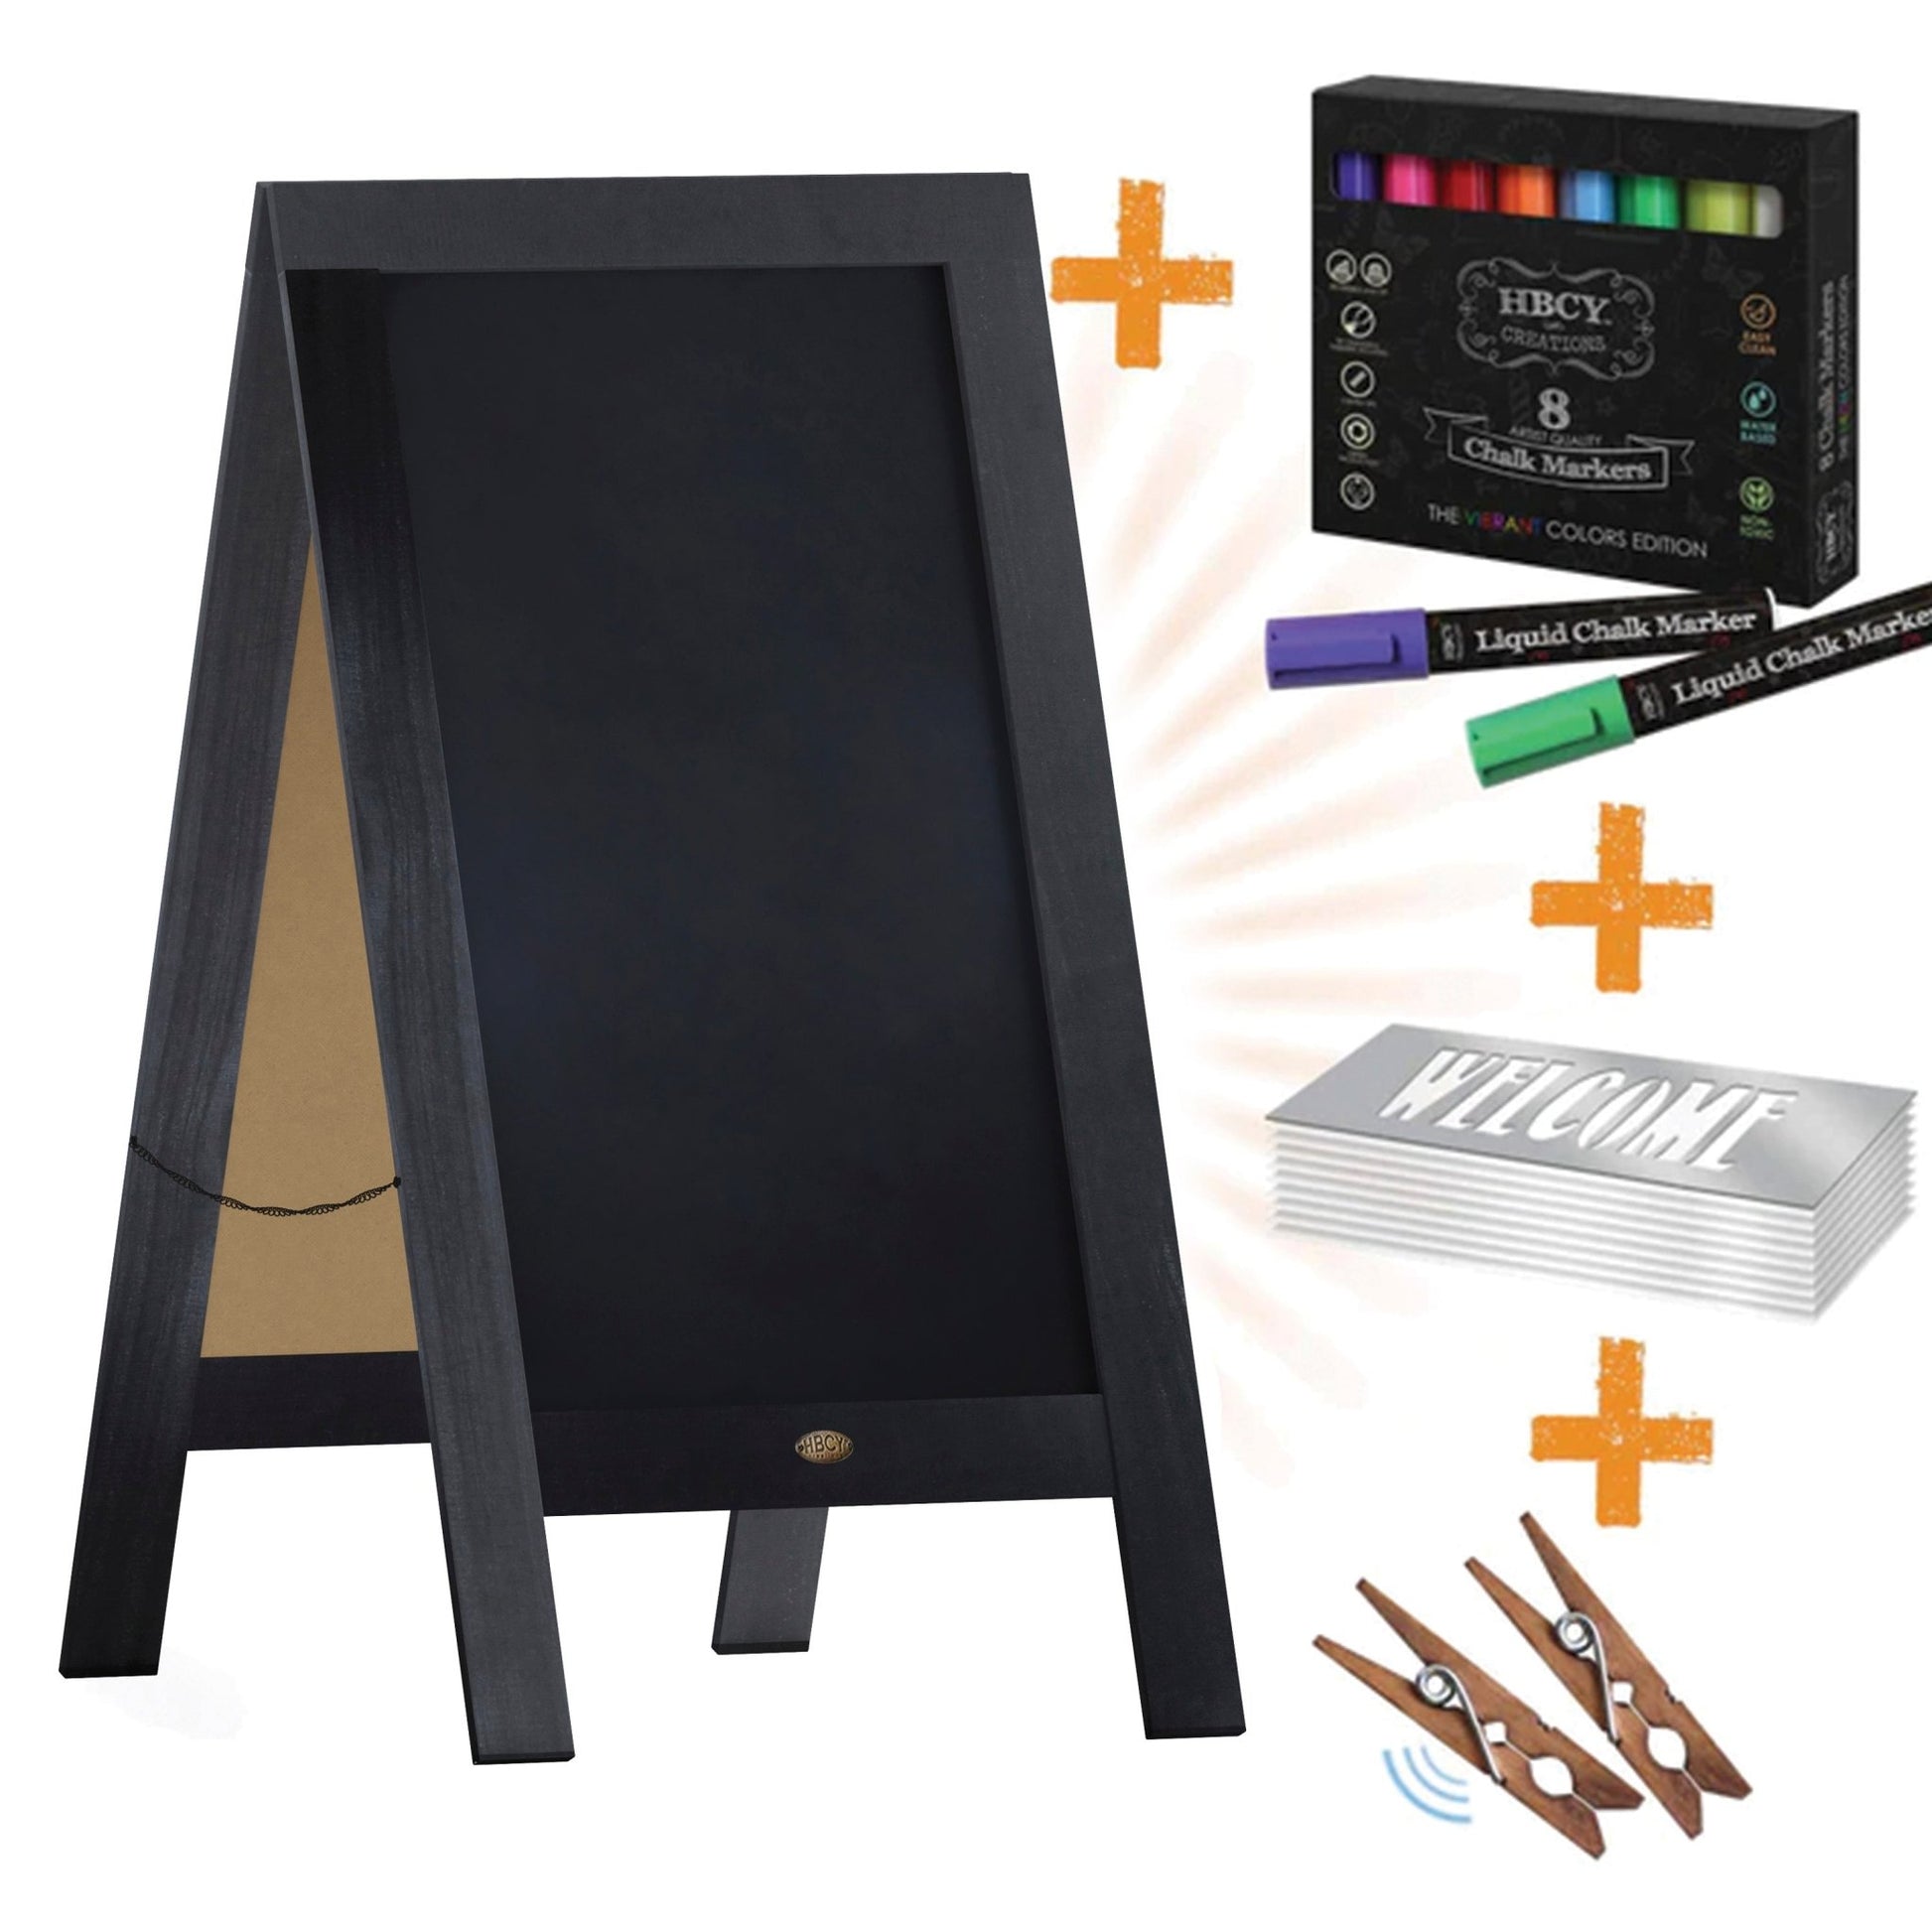 Canterbury 40" x 20" Wooden Indoor/Outdoor A-Frame Magnetic Chalkboard Sign Set with 8 Chalk Markers, 10 Stencils, and 2 Magnets, and Eraser - SchoolOutlet